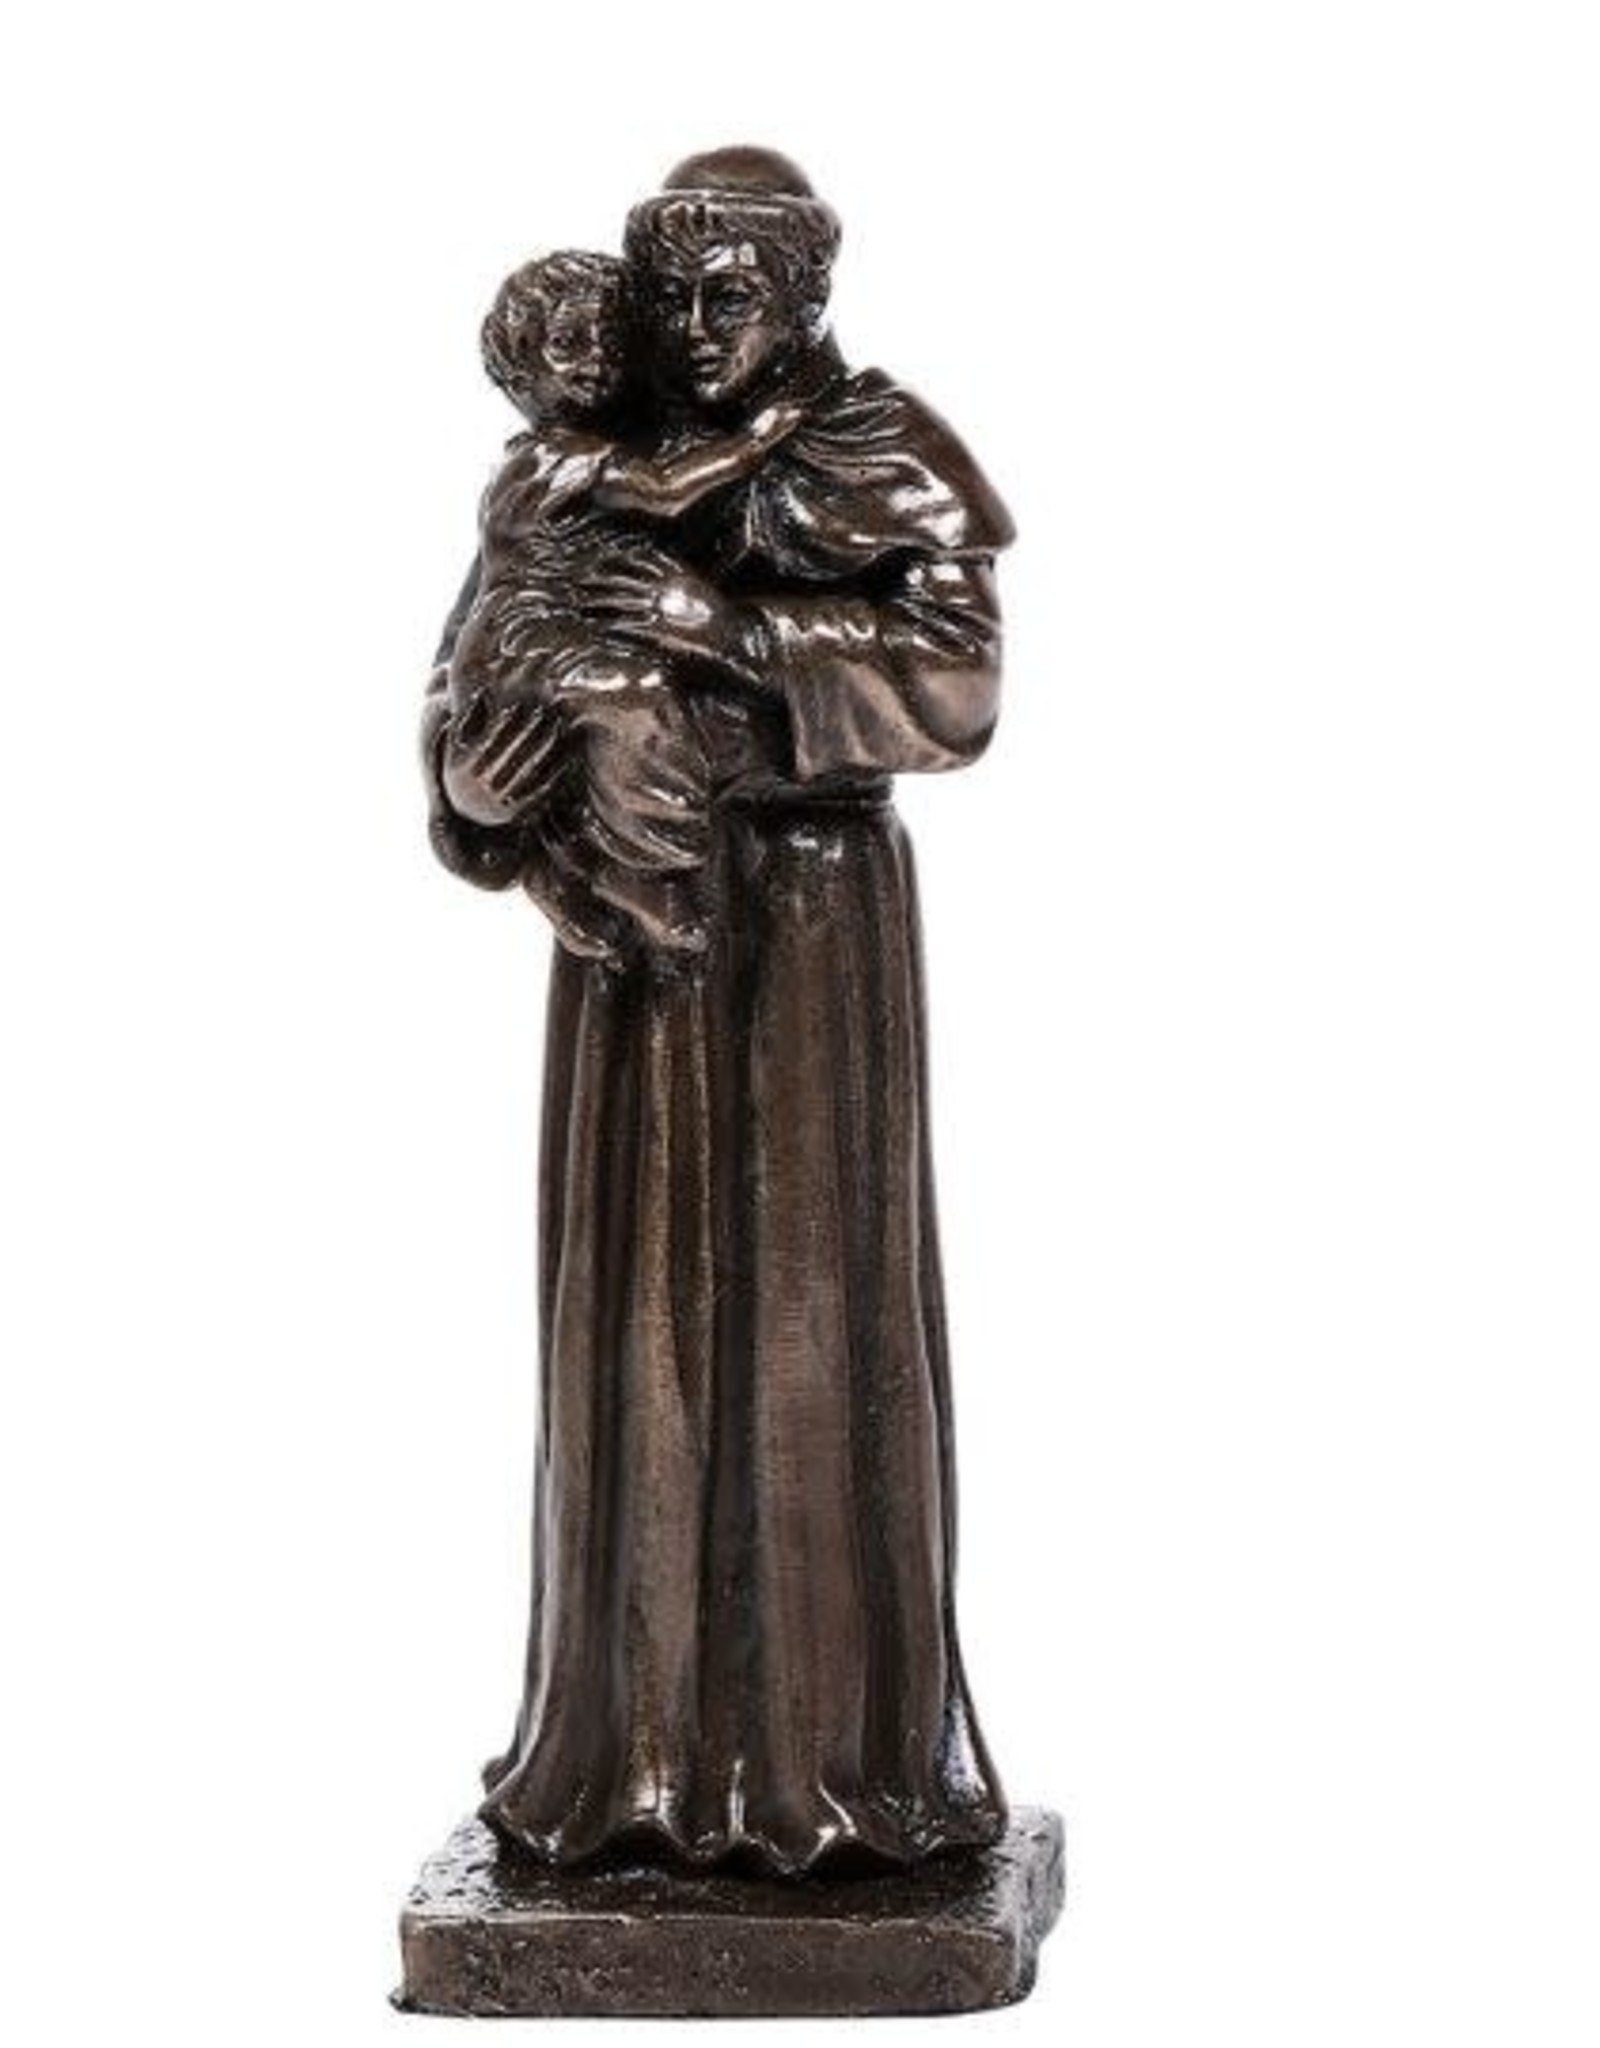 Pacific Trading Saint Anthony Bronzed Resin - 4.25" Statue